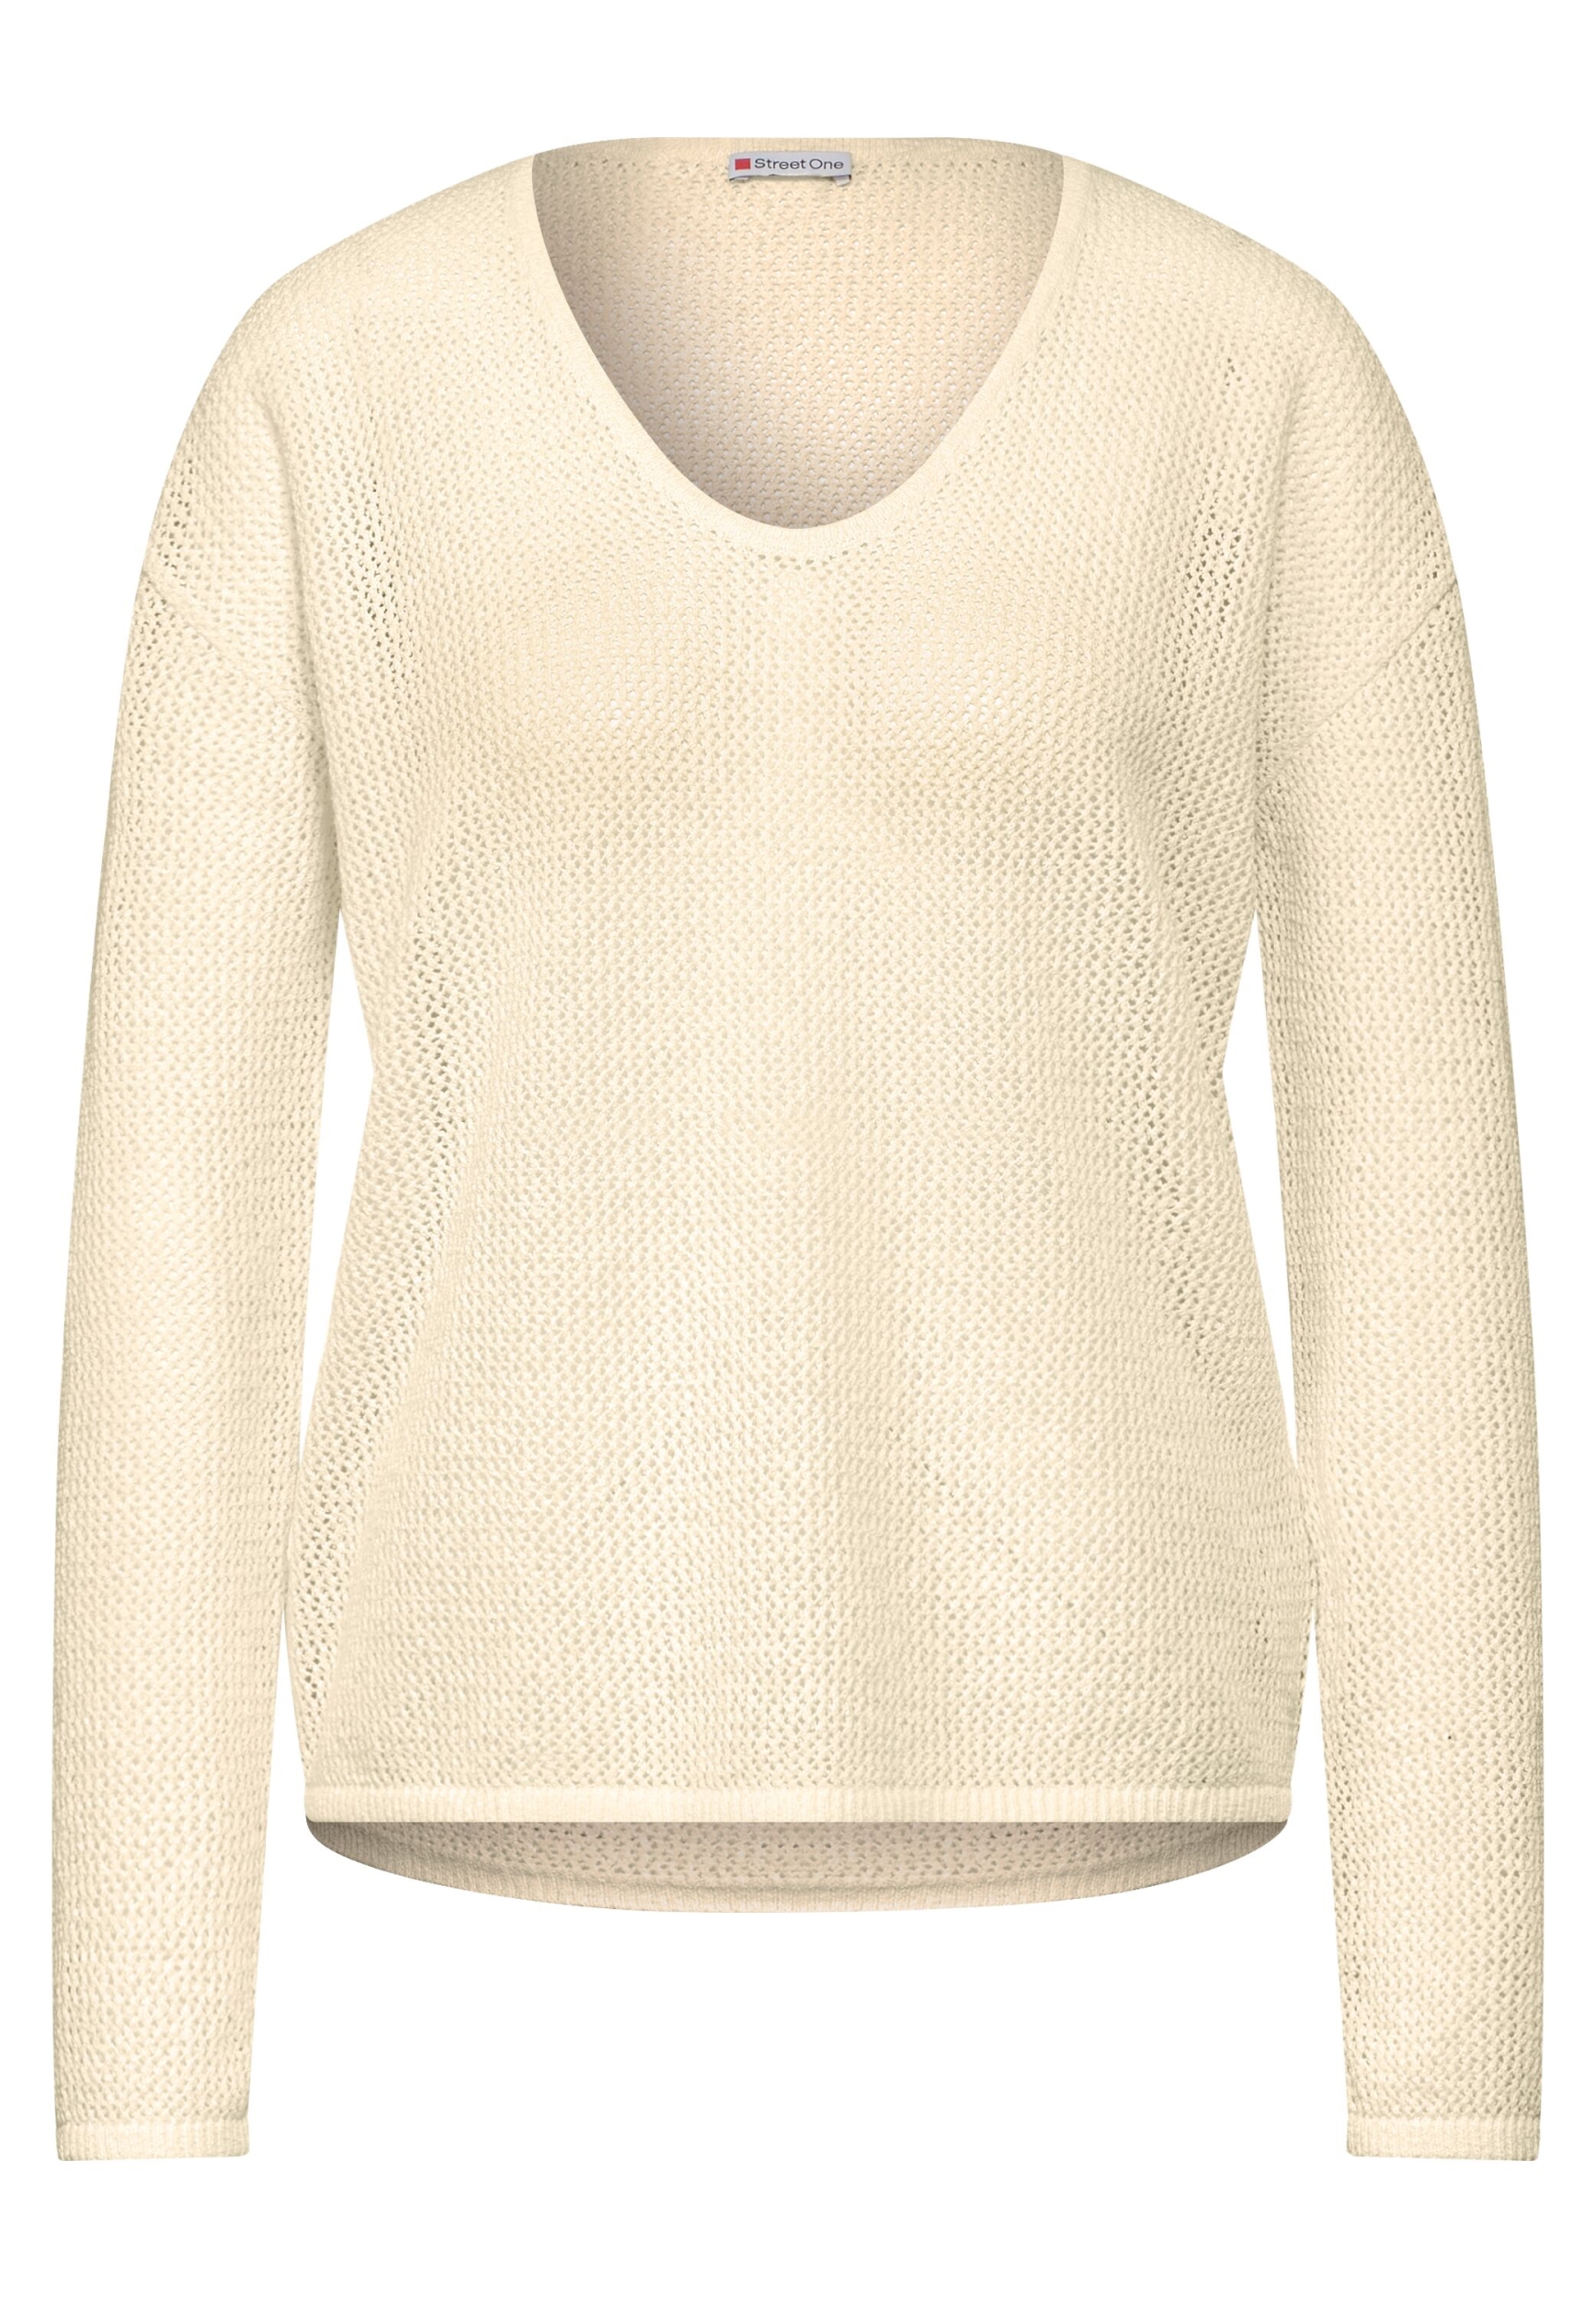 structured mesh sweater